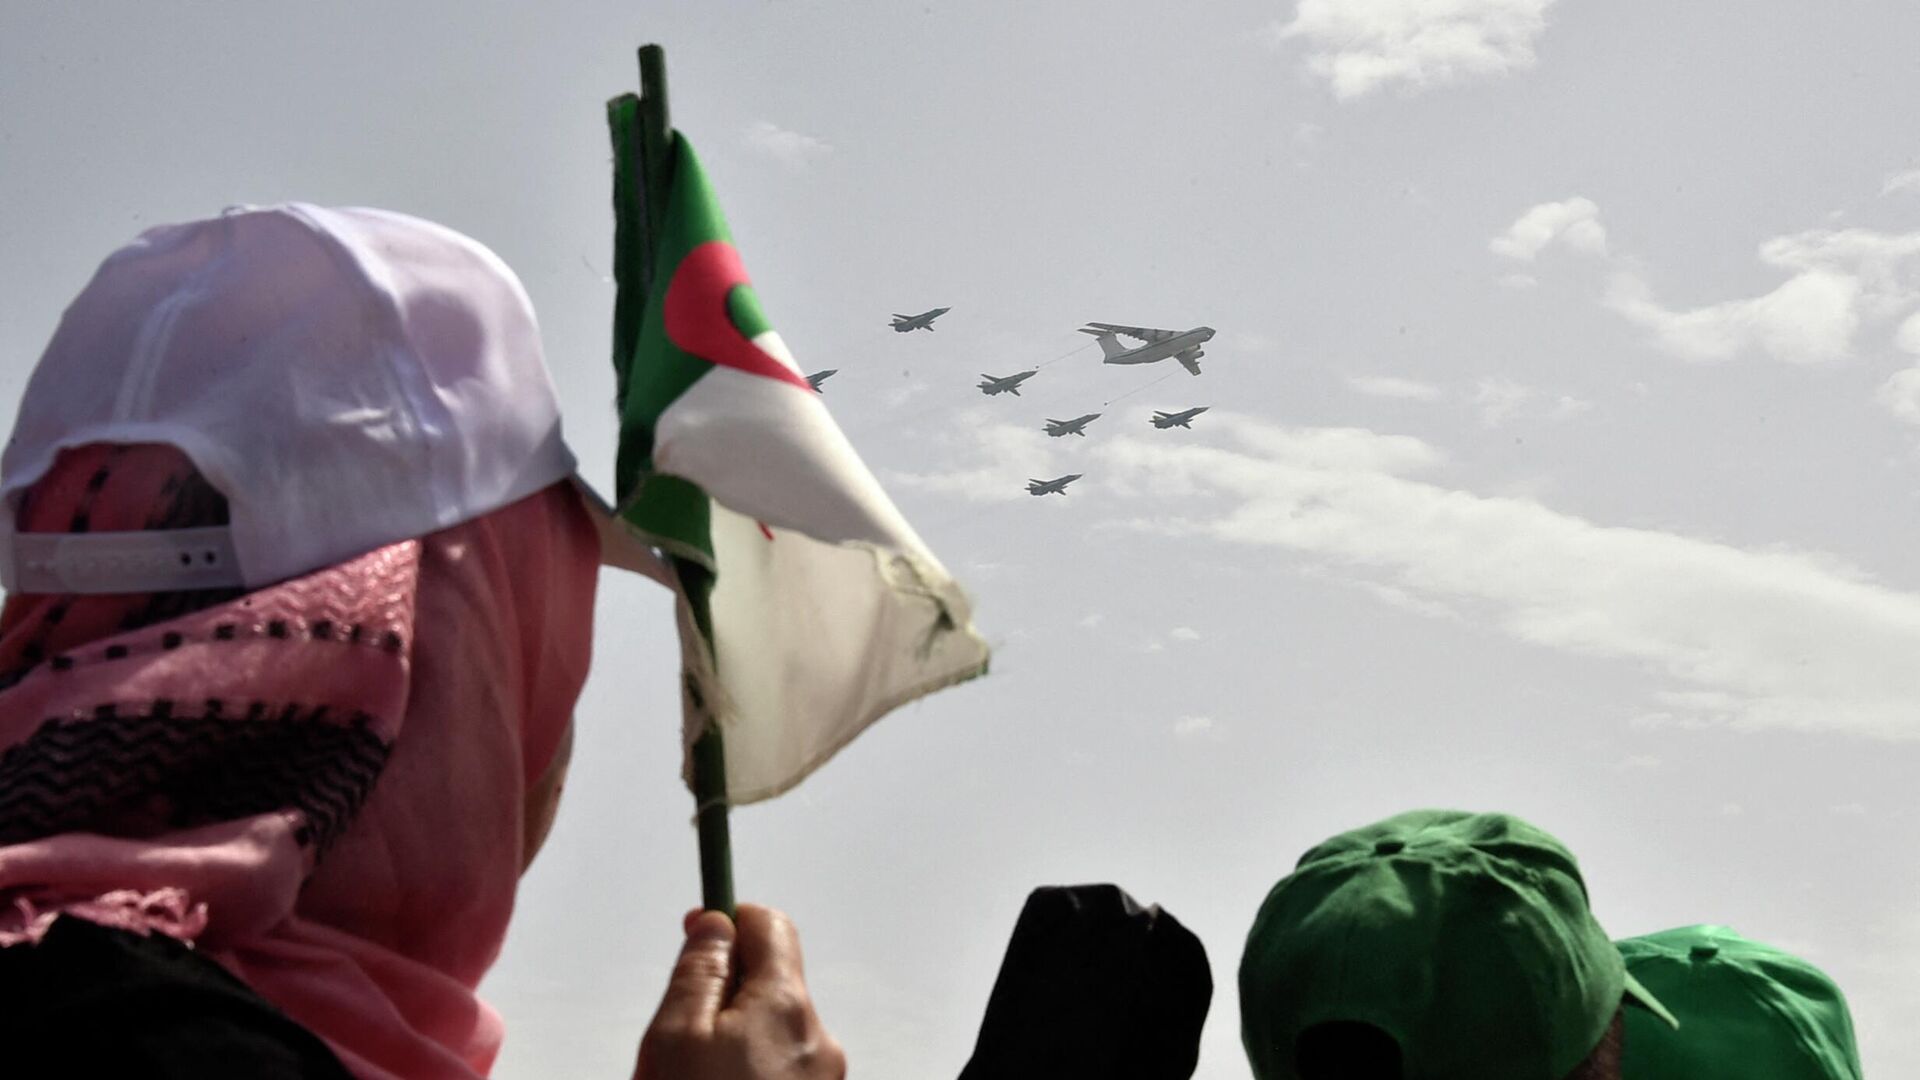 Algerian airforce fly in formation over the capital Algiers on July 5, 2022, as the country celebrates the 60th anniversary of its independence. - Sputnik International, 1920, 06.07.2022